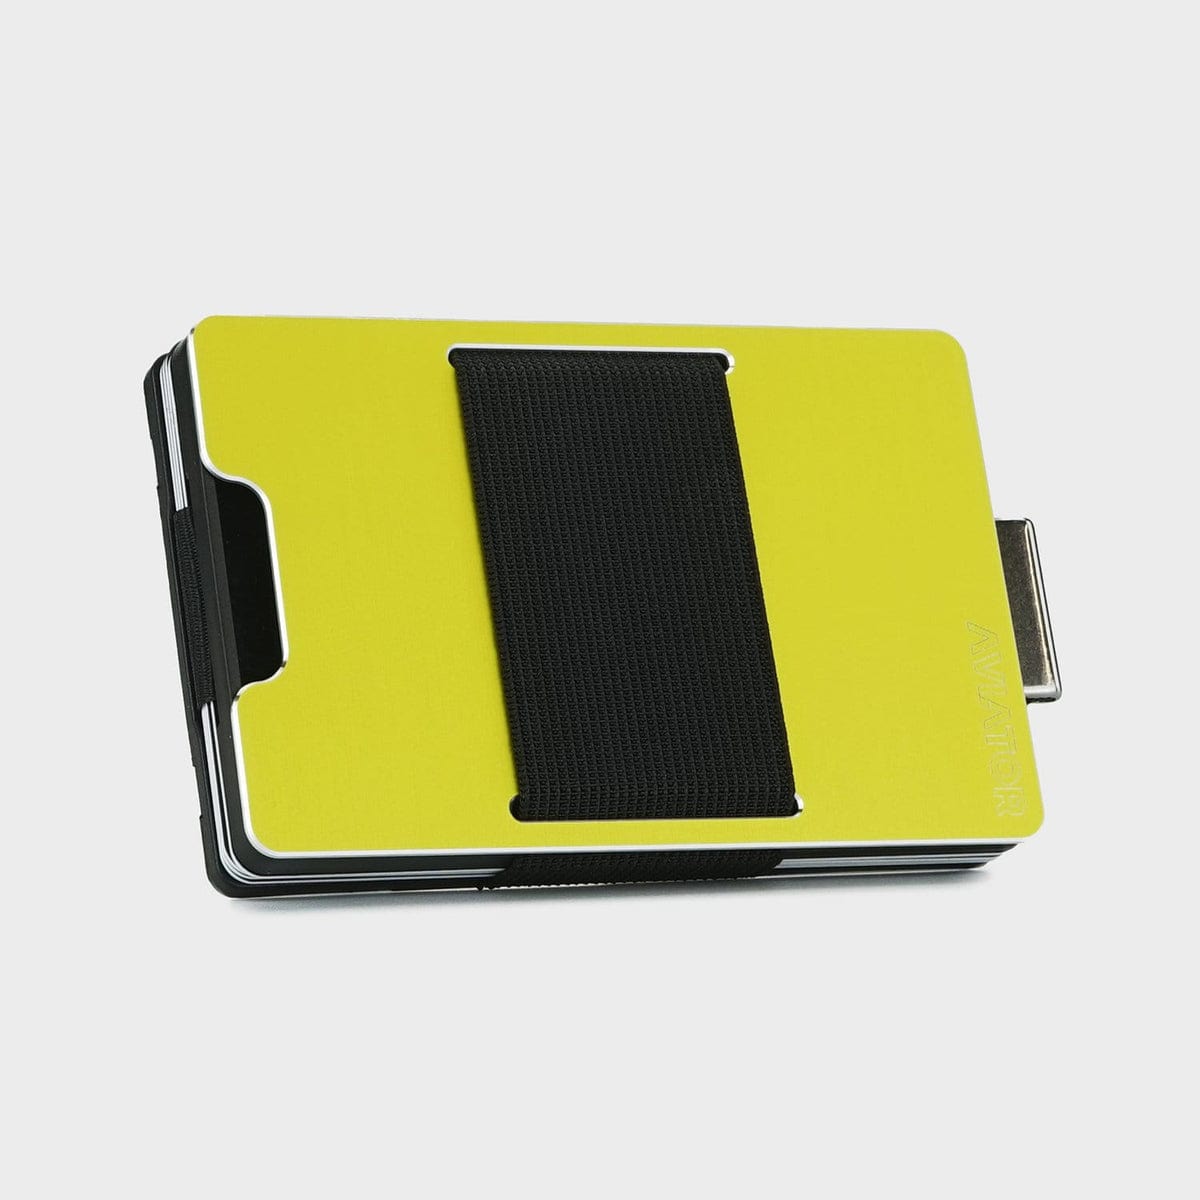 NOT FLAW[LESS] Electric Lime Aluminum Slim Wallet